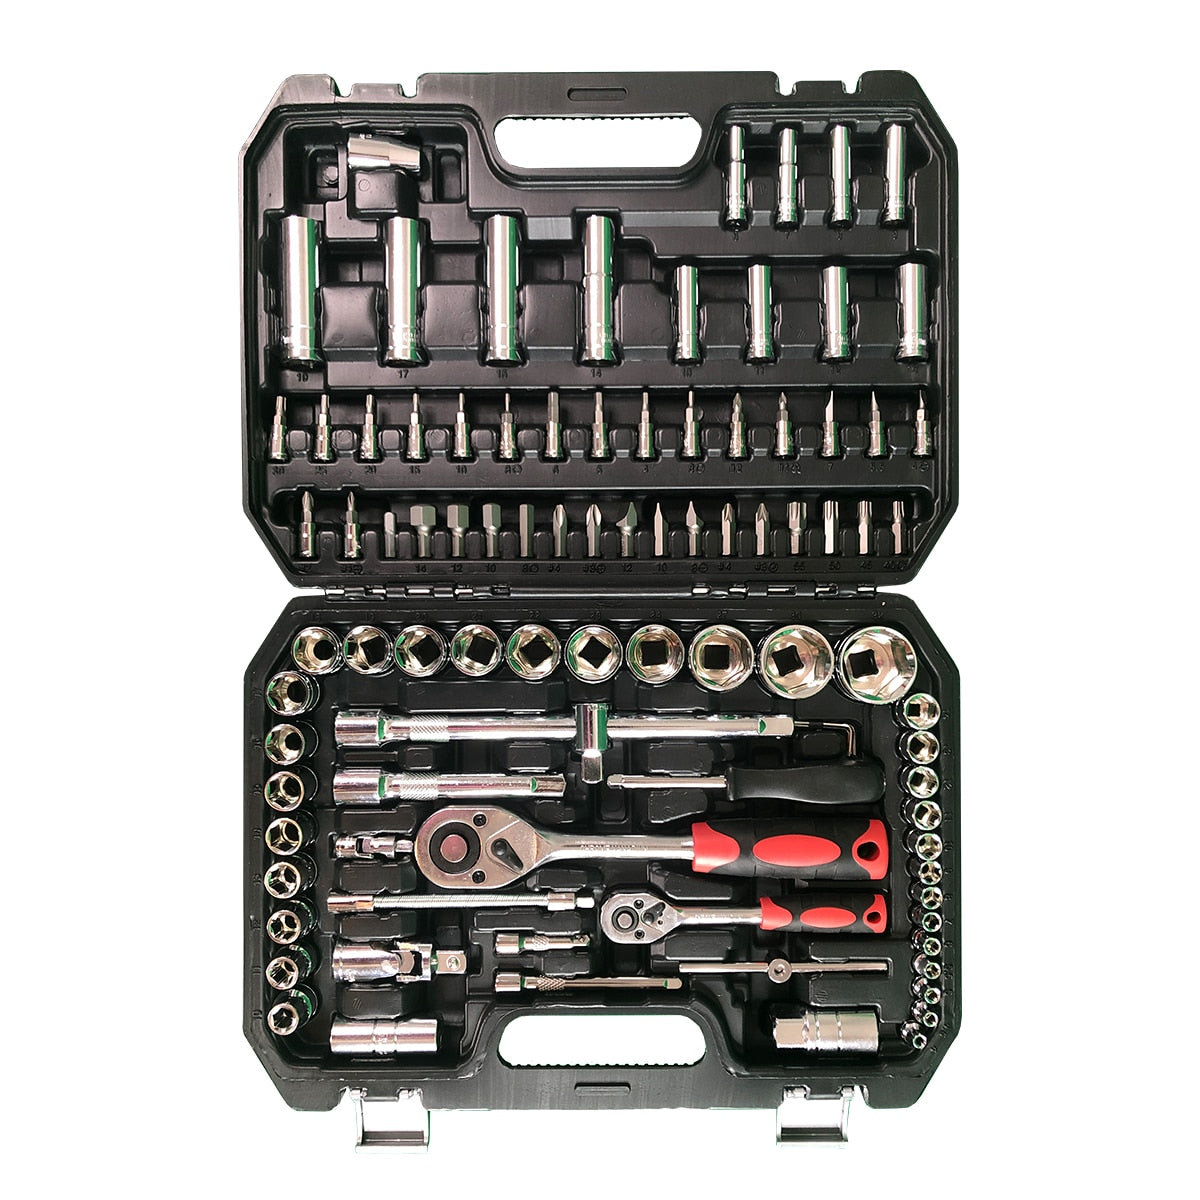 A set of hand tools in case for machine tool machine case suitcase car